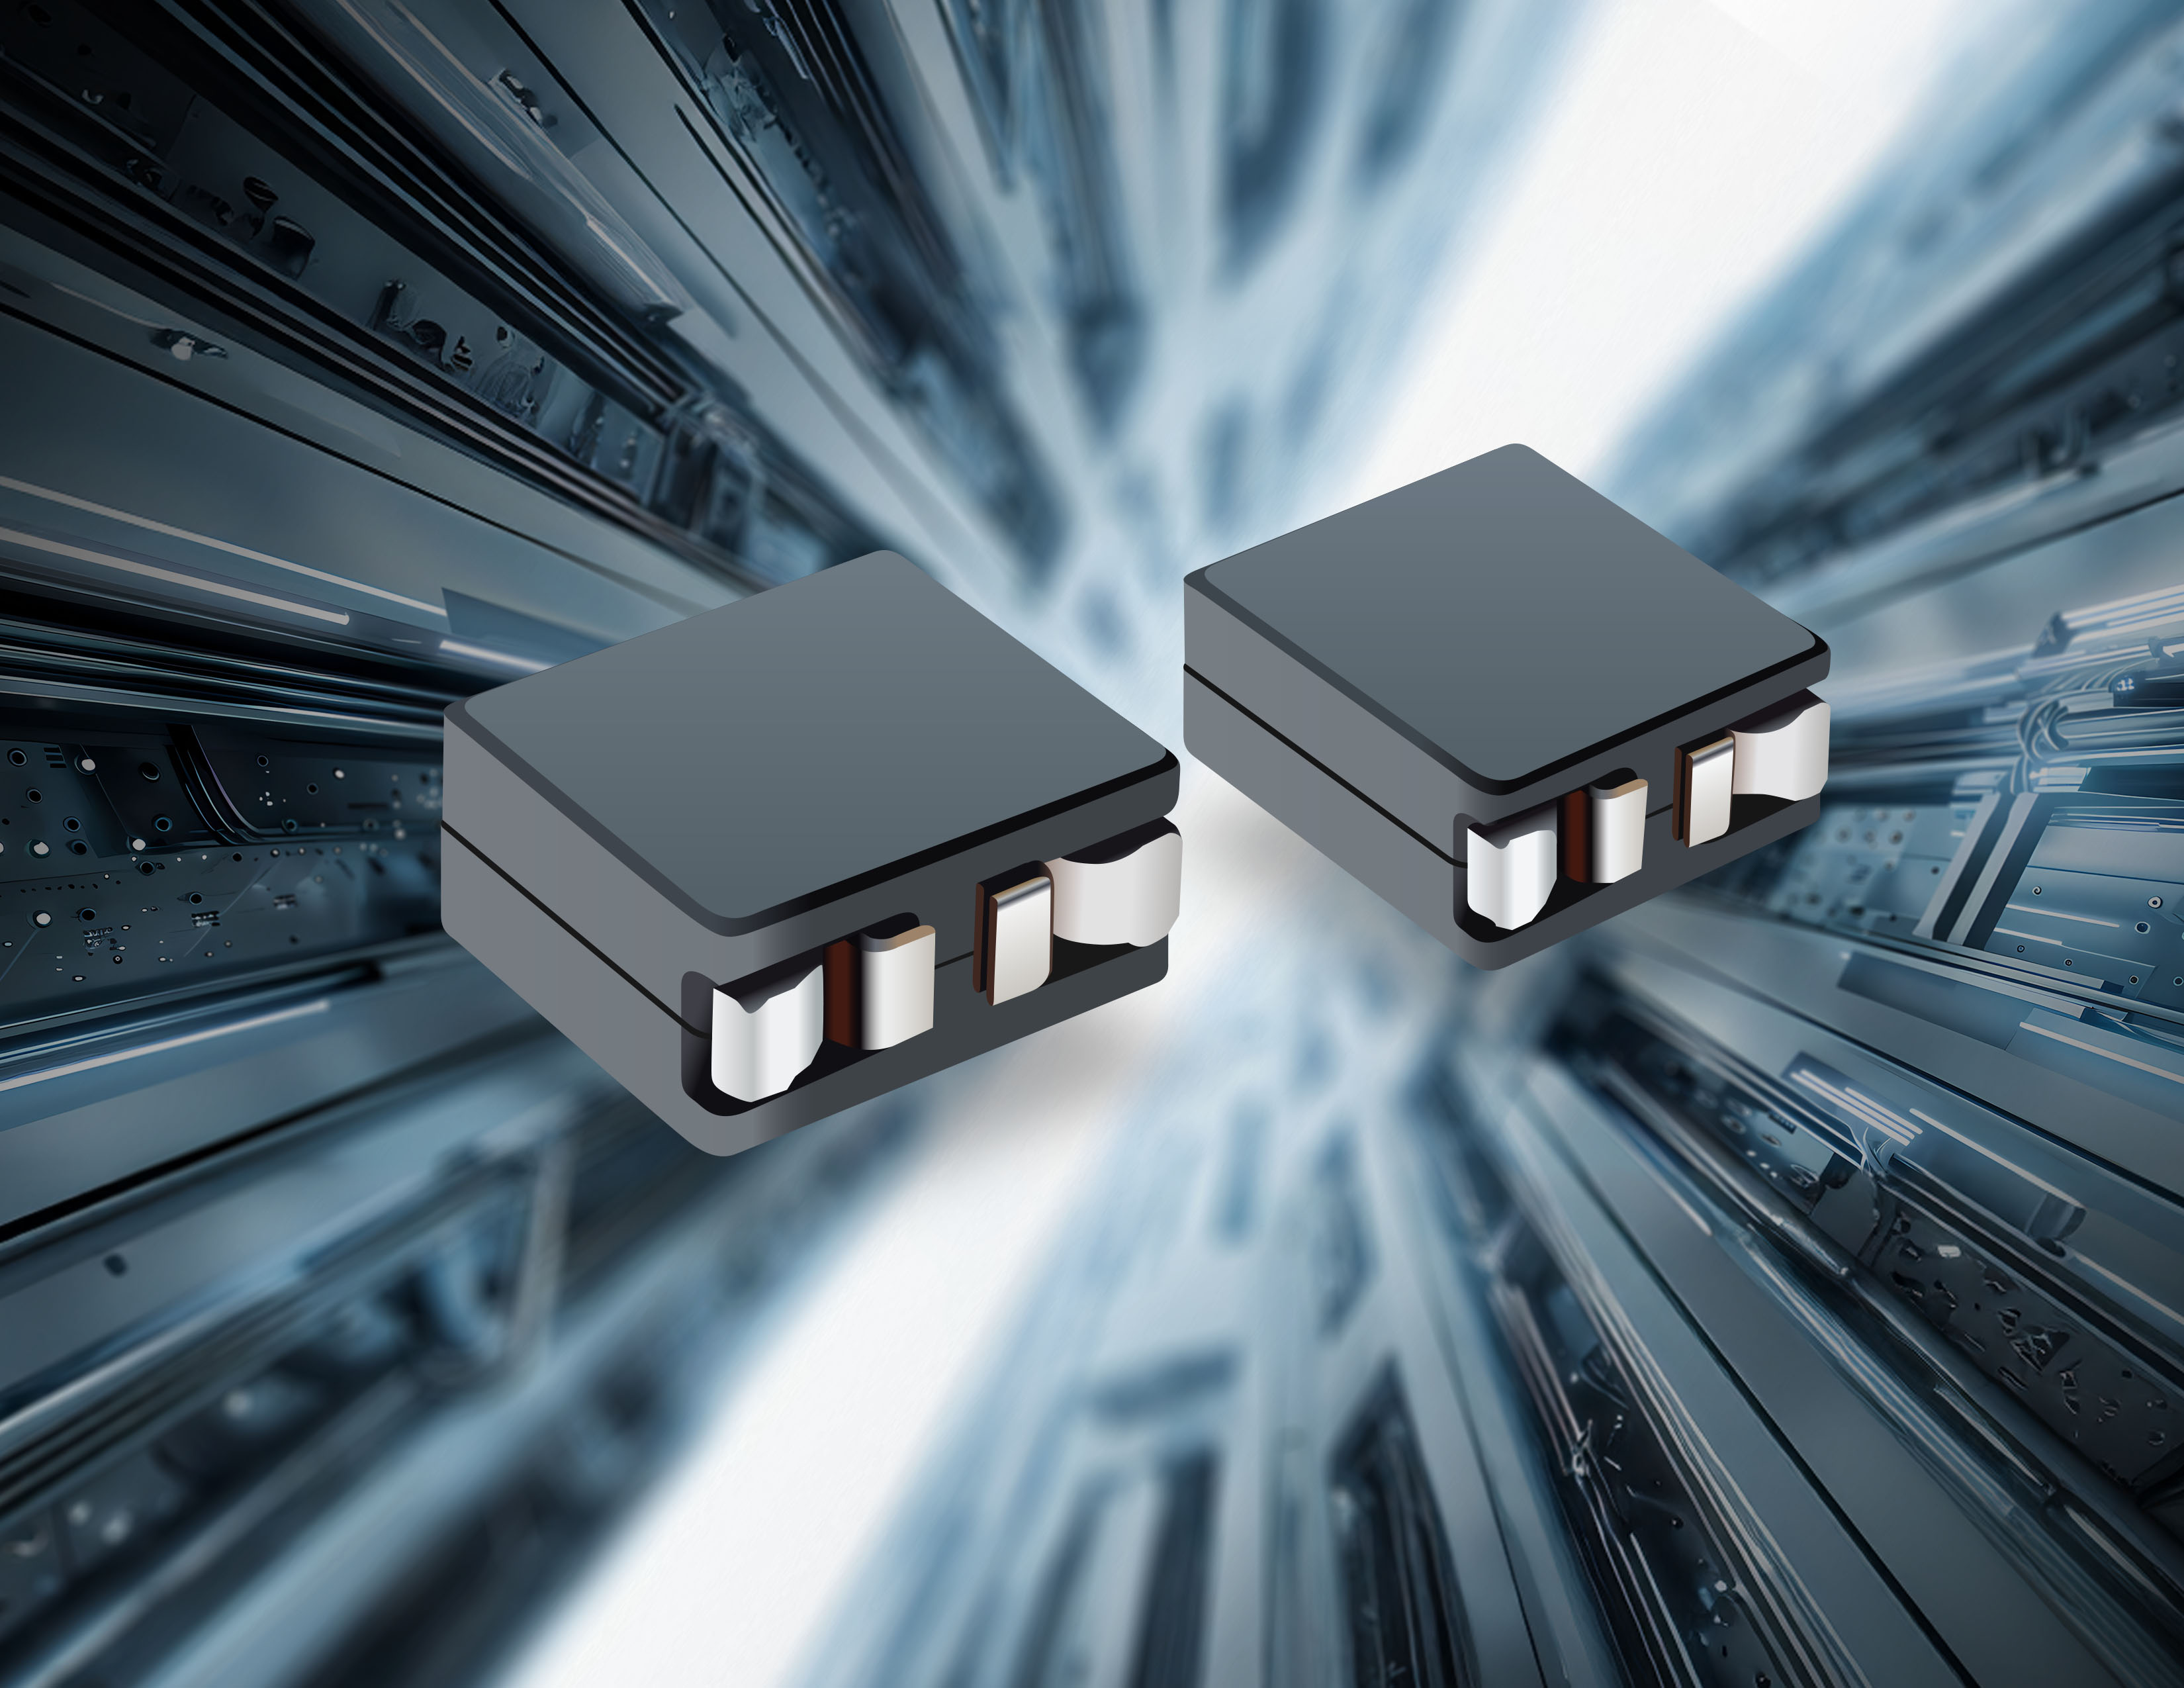 Inductors Match Today's Data-Driven Application Performance Demands